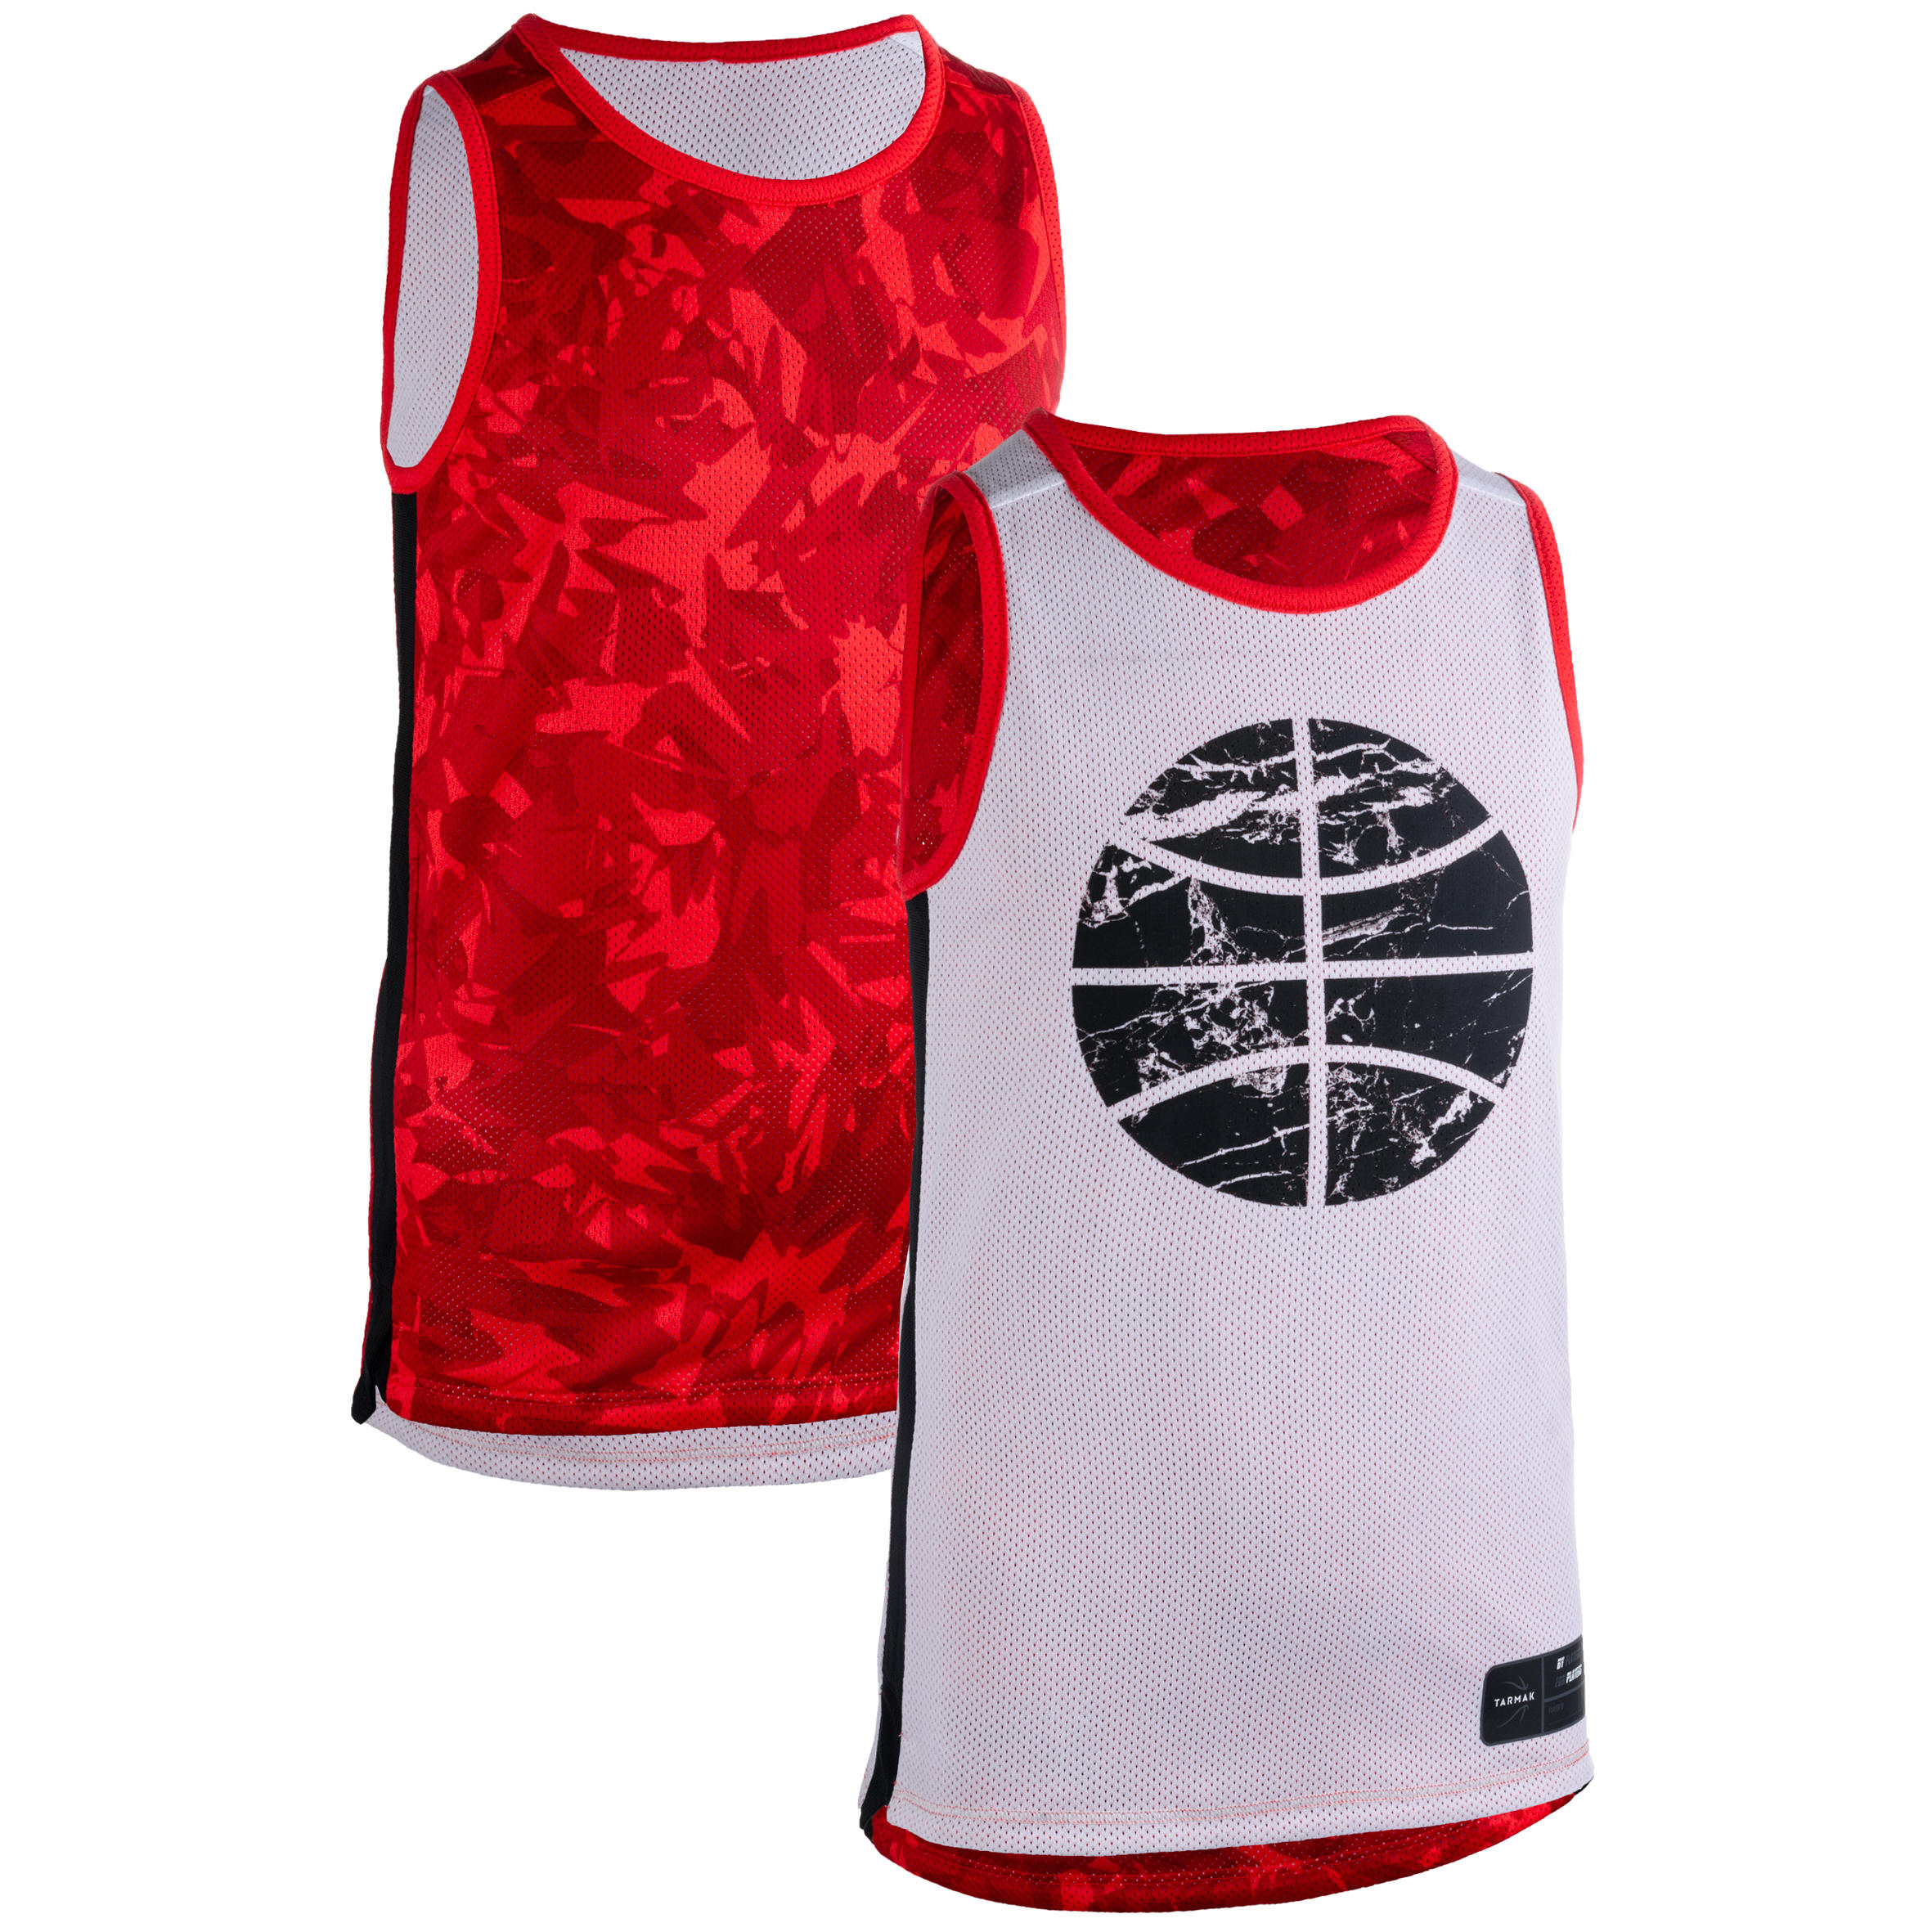 red white reversible basketball jersey